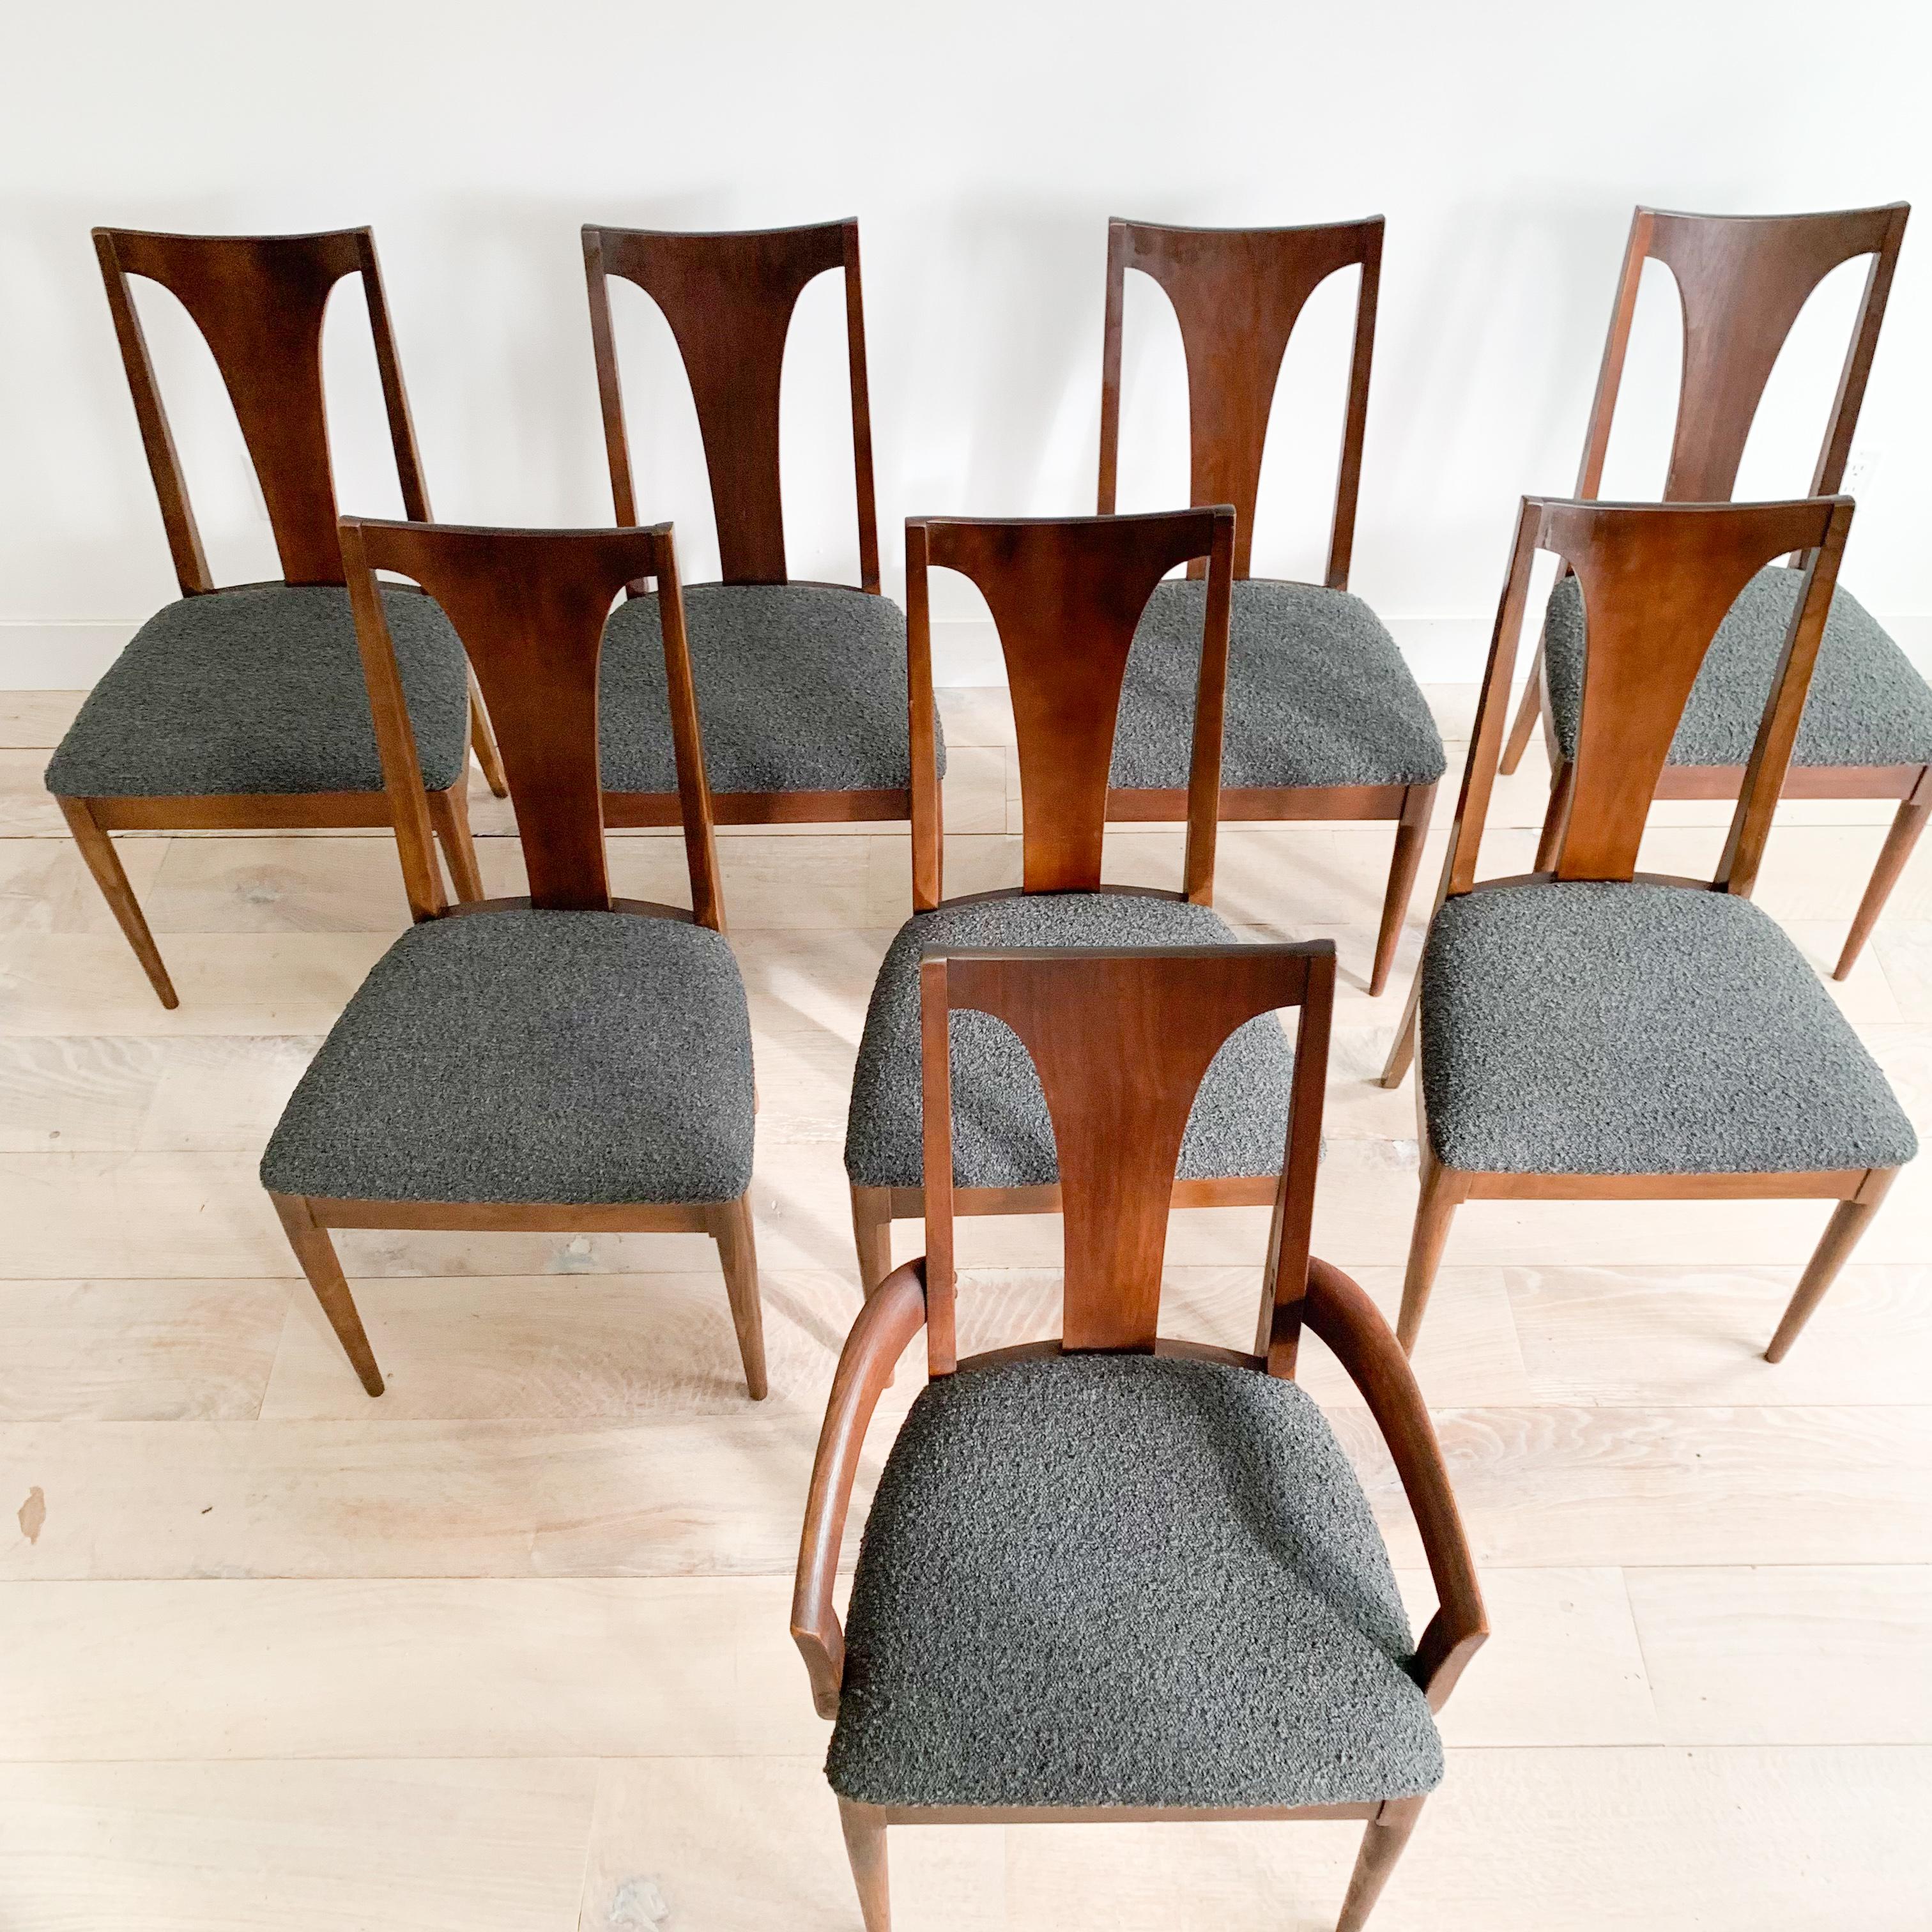 Set of 8 Broyhill Brasilia Dining Chairs - New Upholstery 2